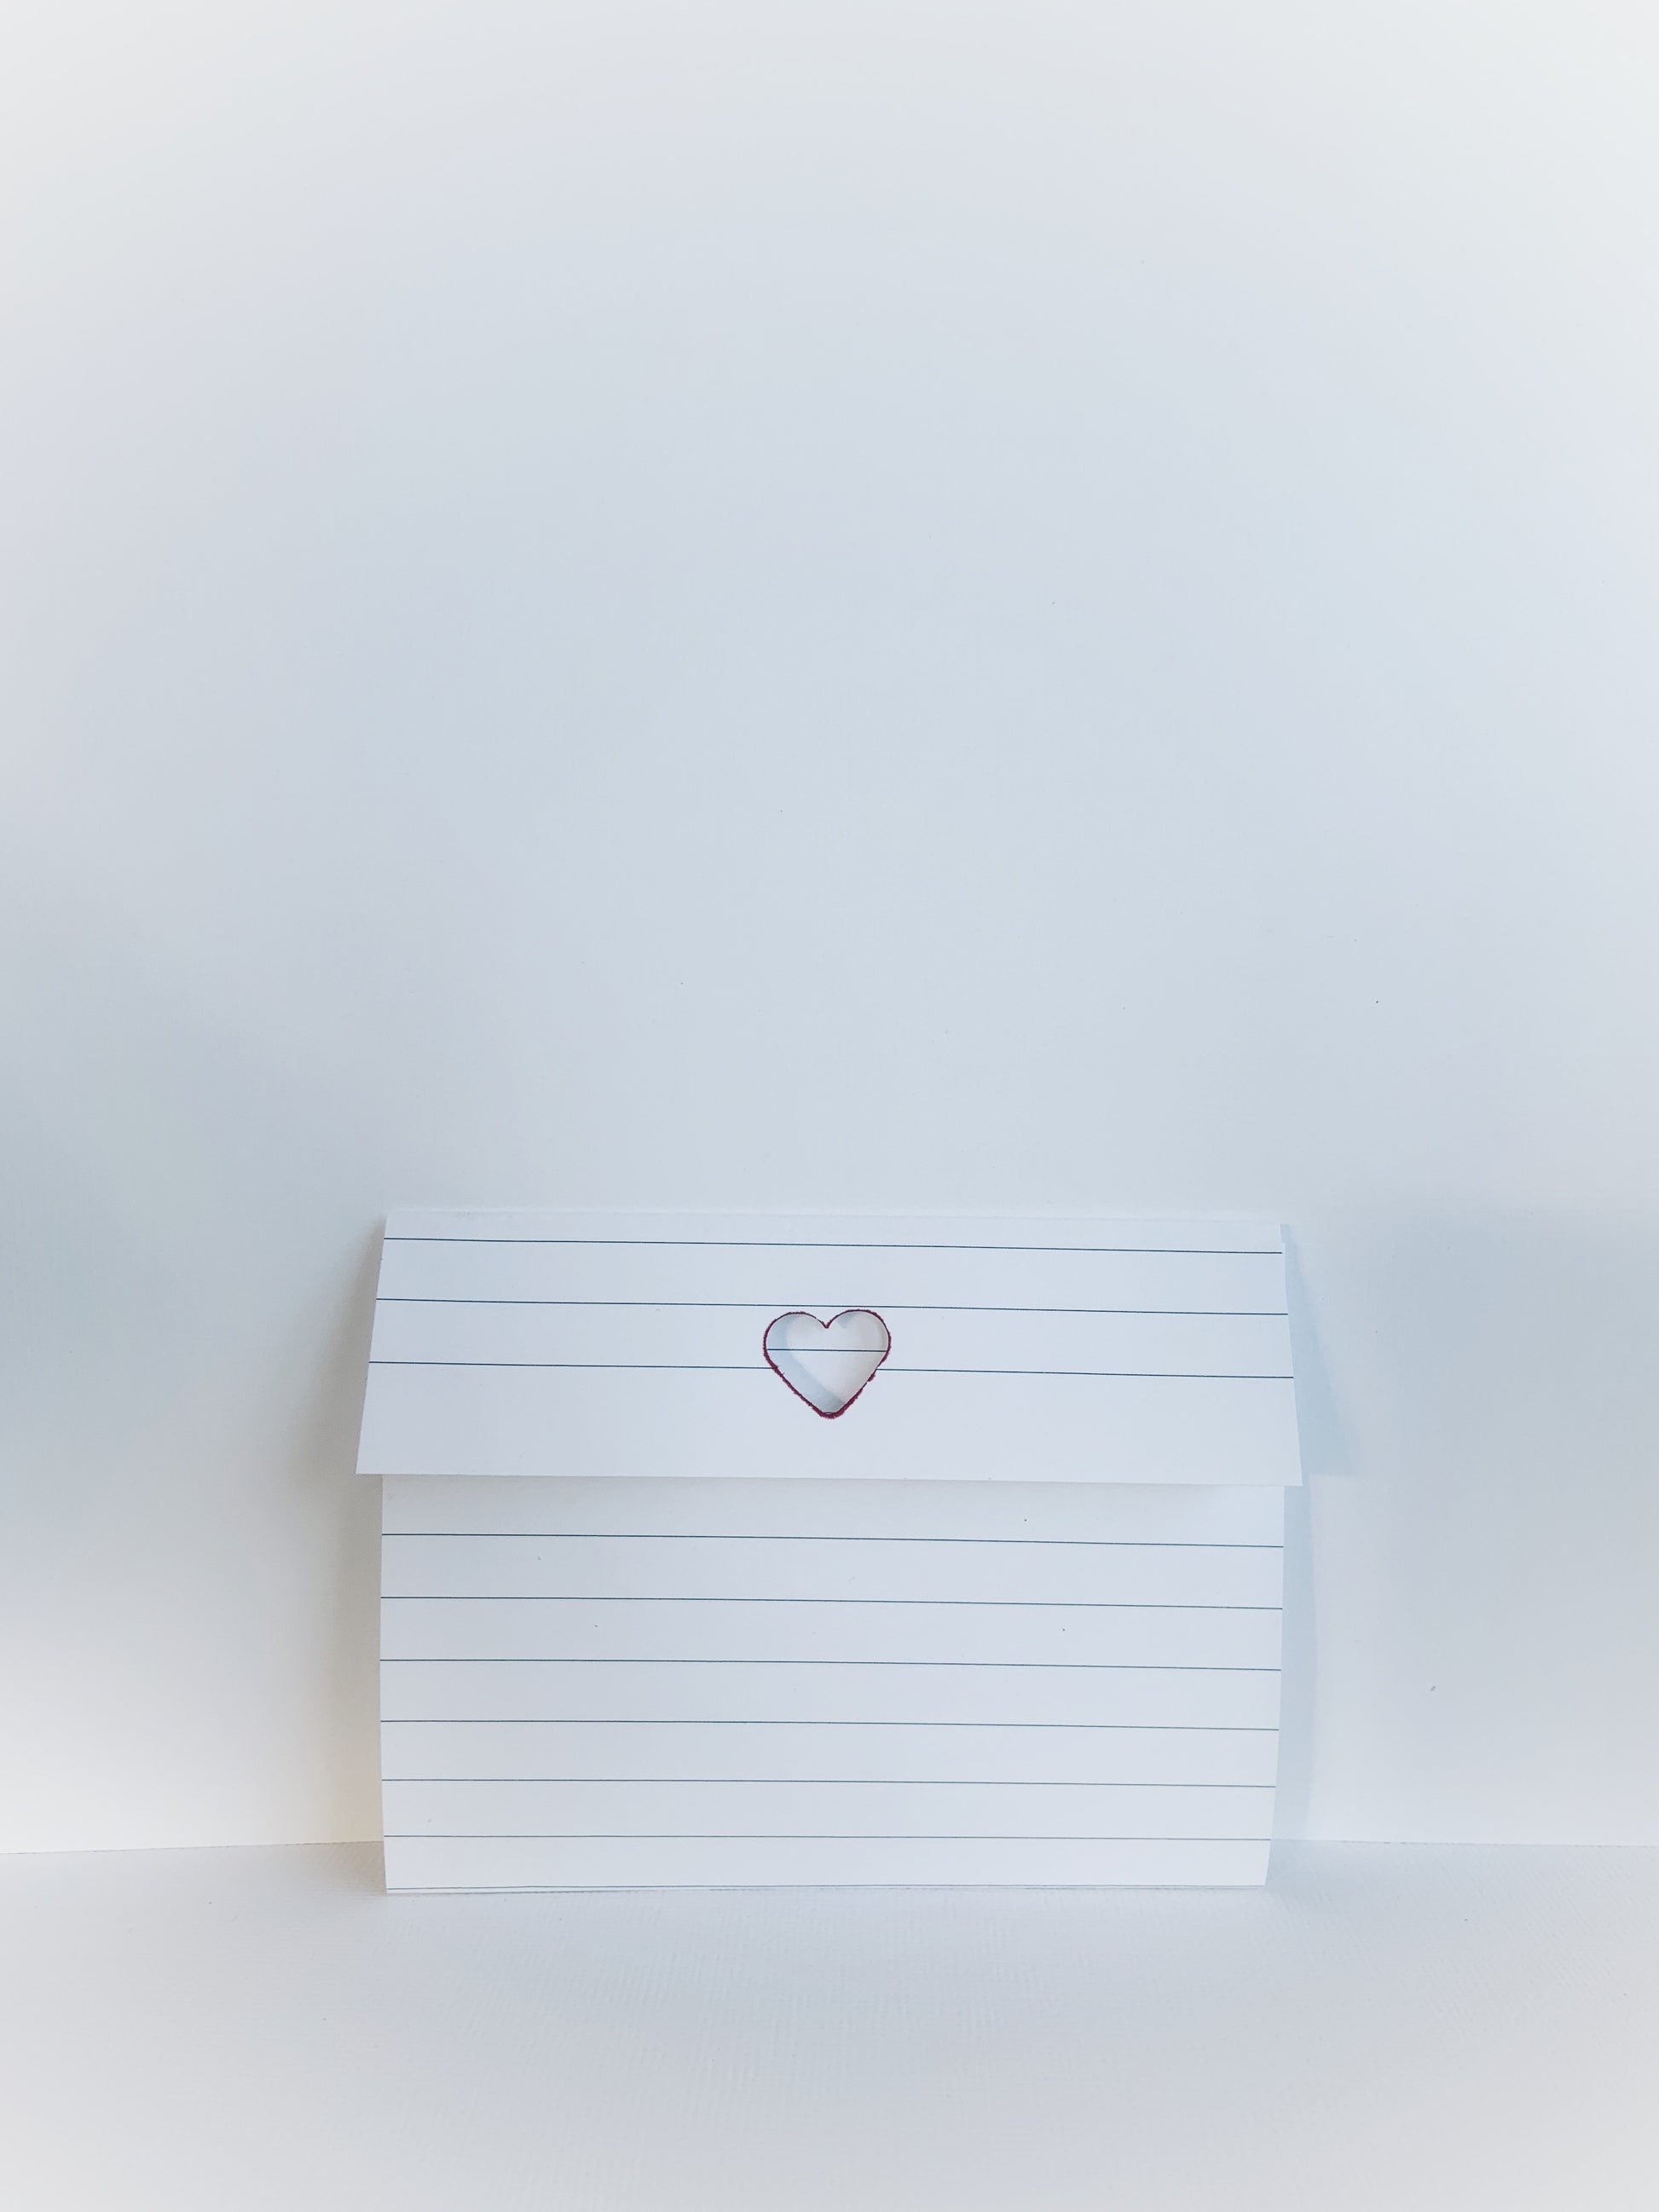 Folded lined notepaper with a cutout heart.